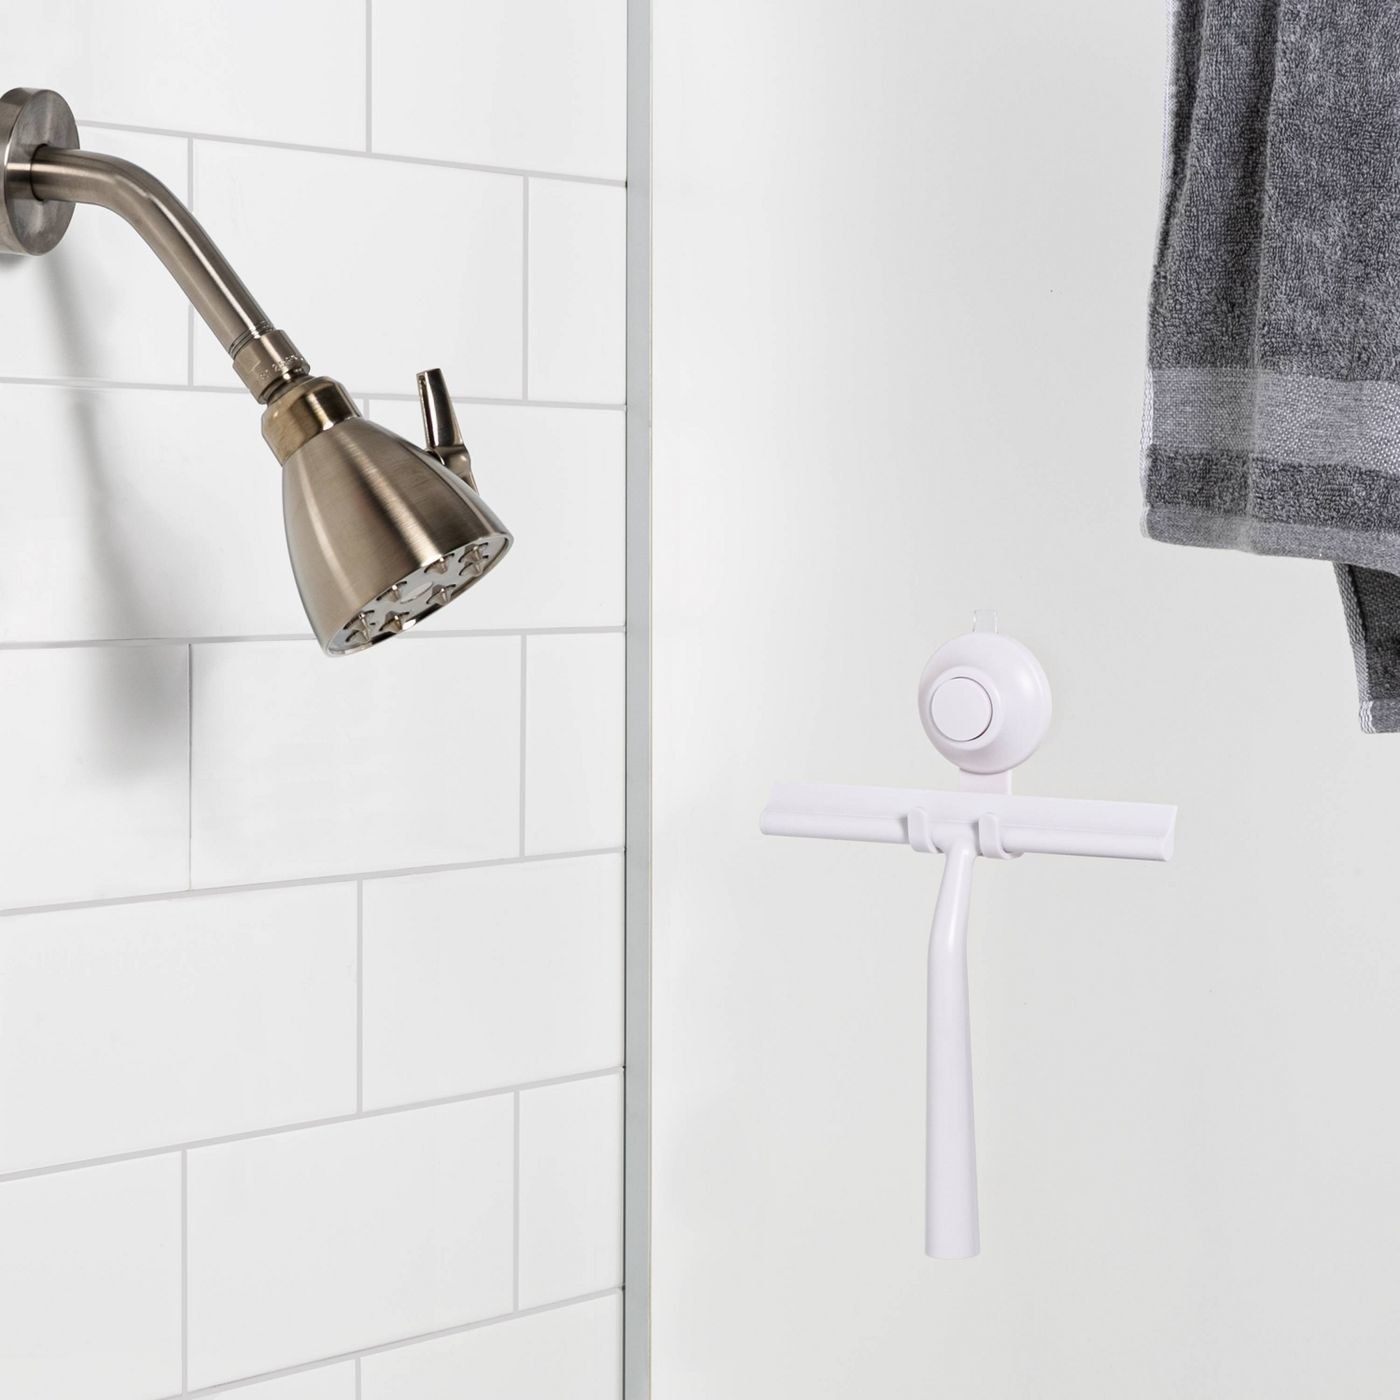 the white squeegee hanging in a shower